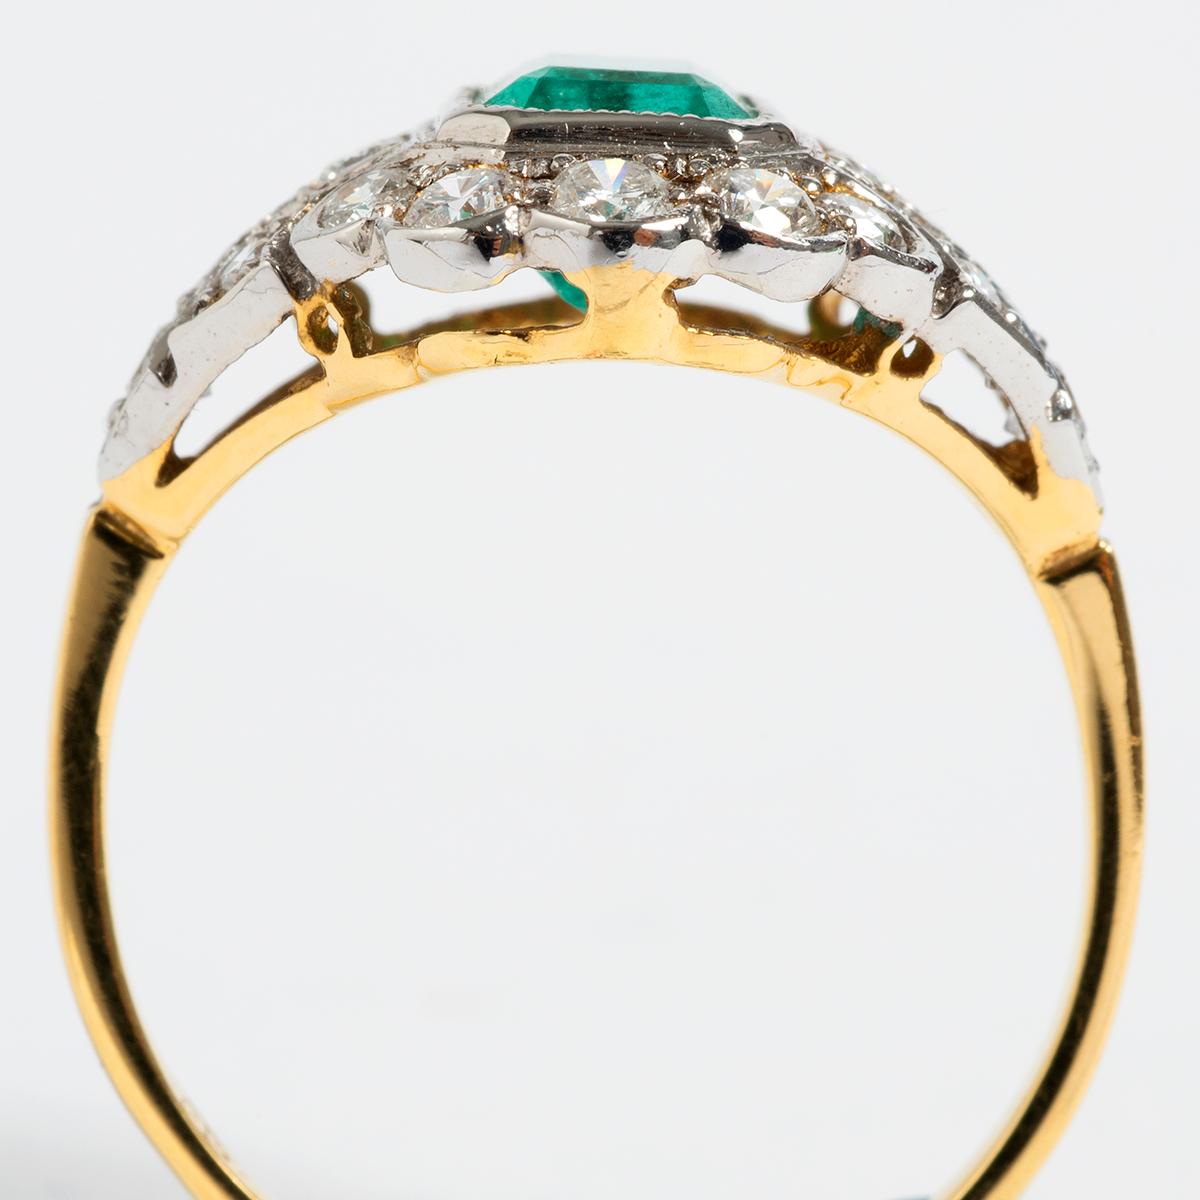 Mixed Cut Emerald (est 1.20ct) & Diamond (est .60ct) Cluster Ring, 18K Yellow Gold ... For Sale